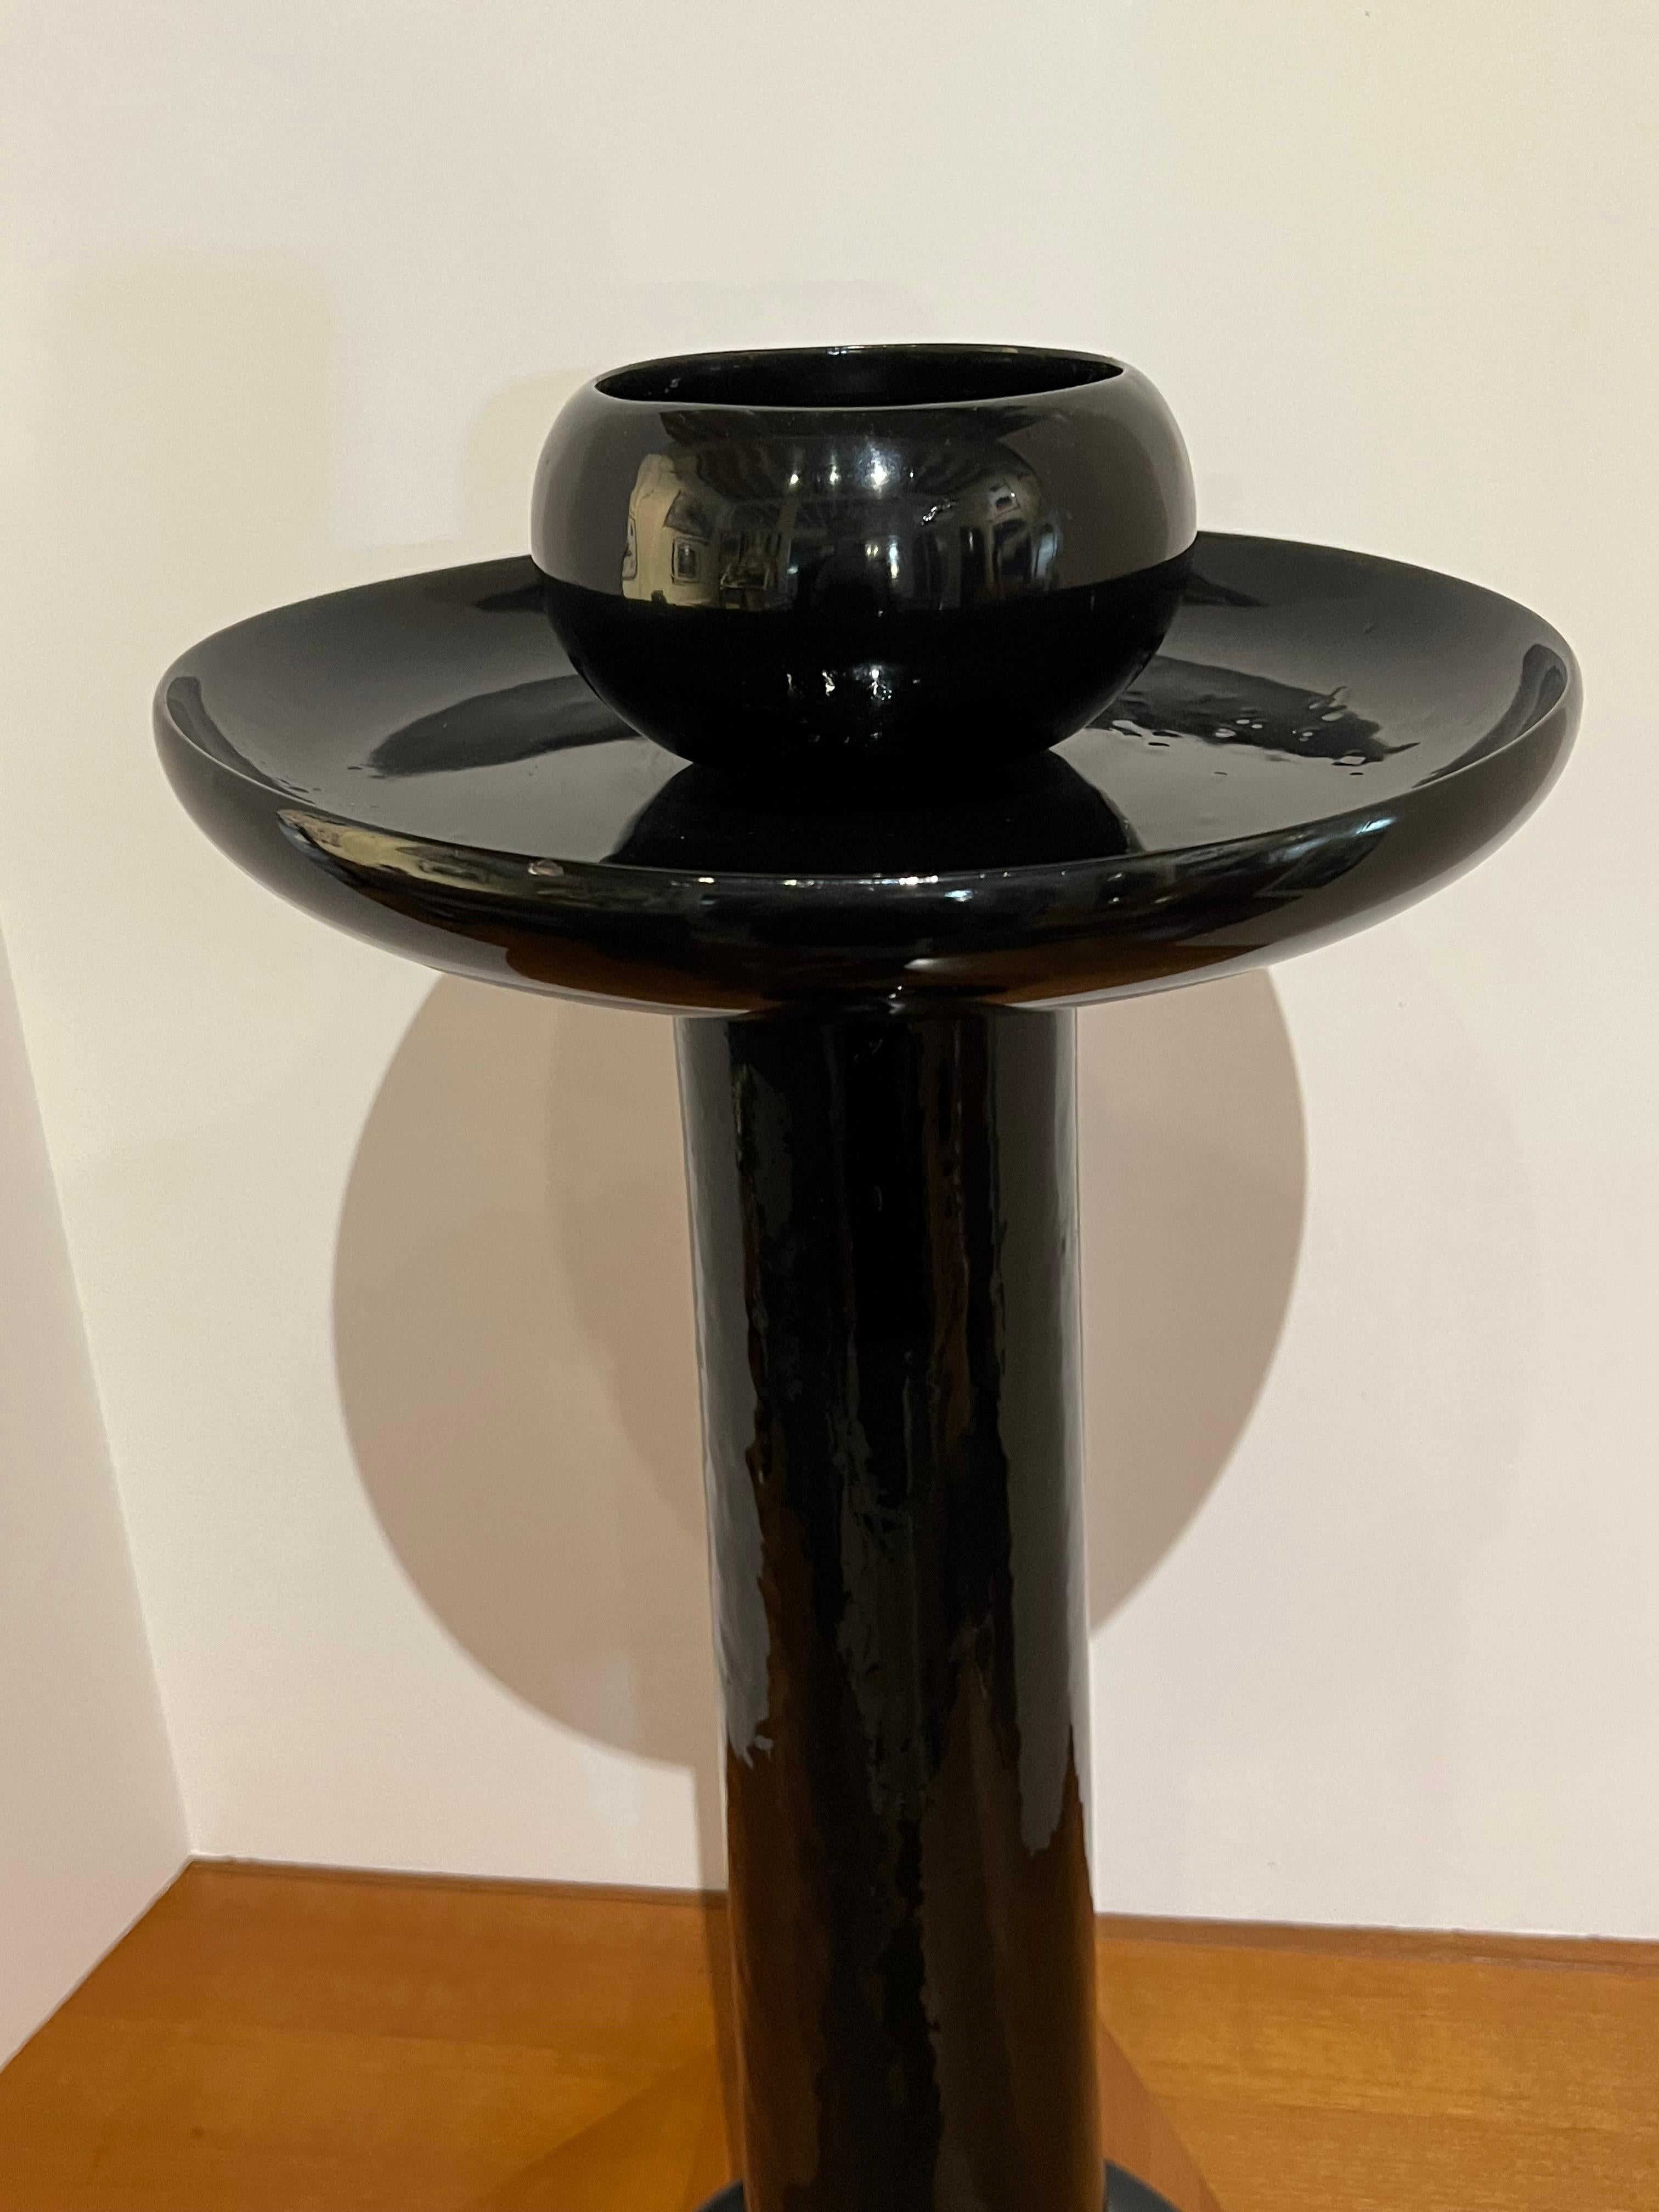 A pair of tall 1980s candleholders made of glossy black resin. They could hold two candlesticks or be used like little vases.
